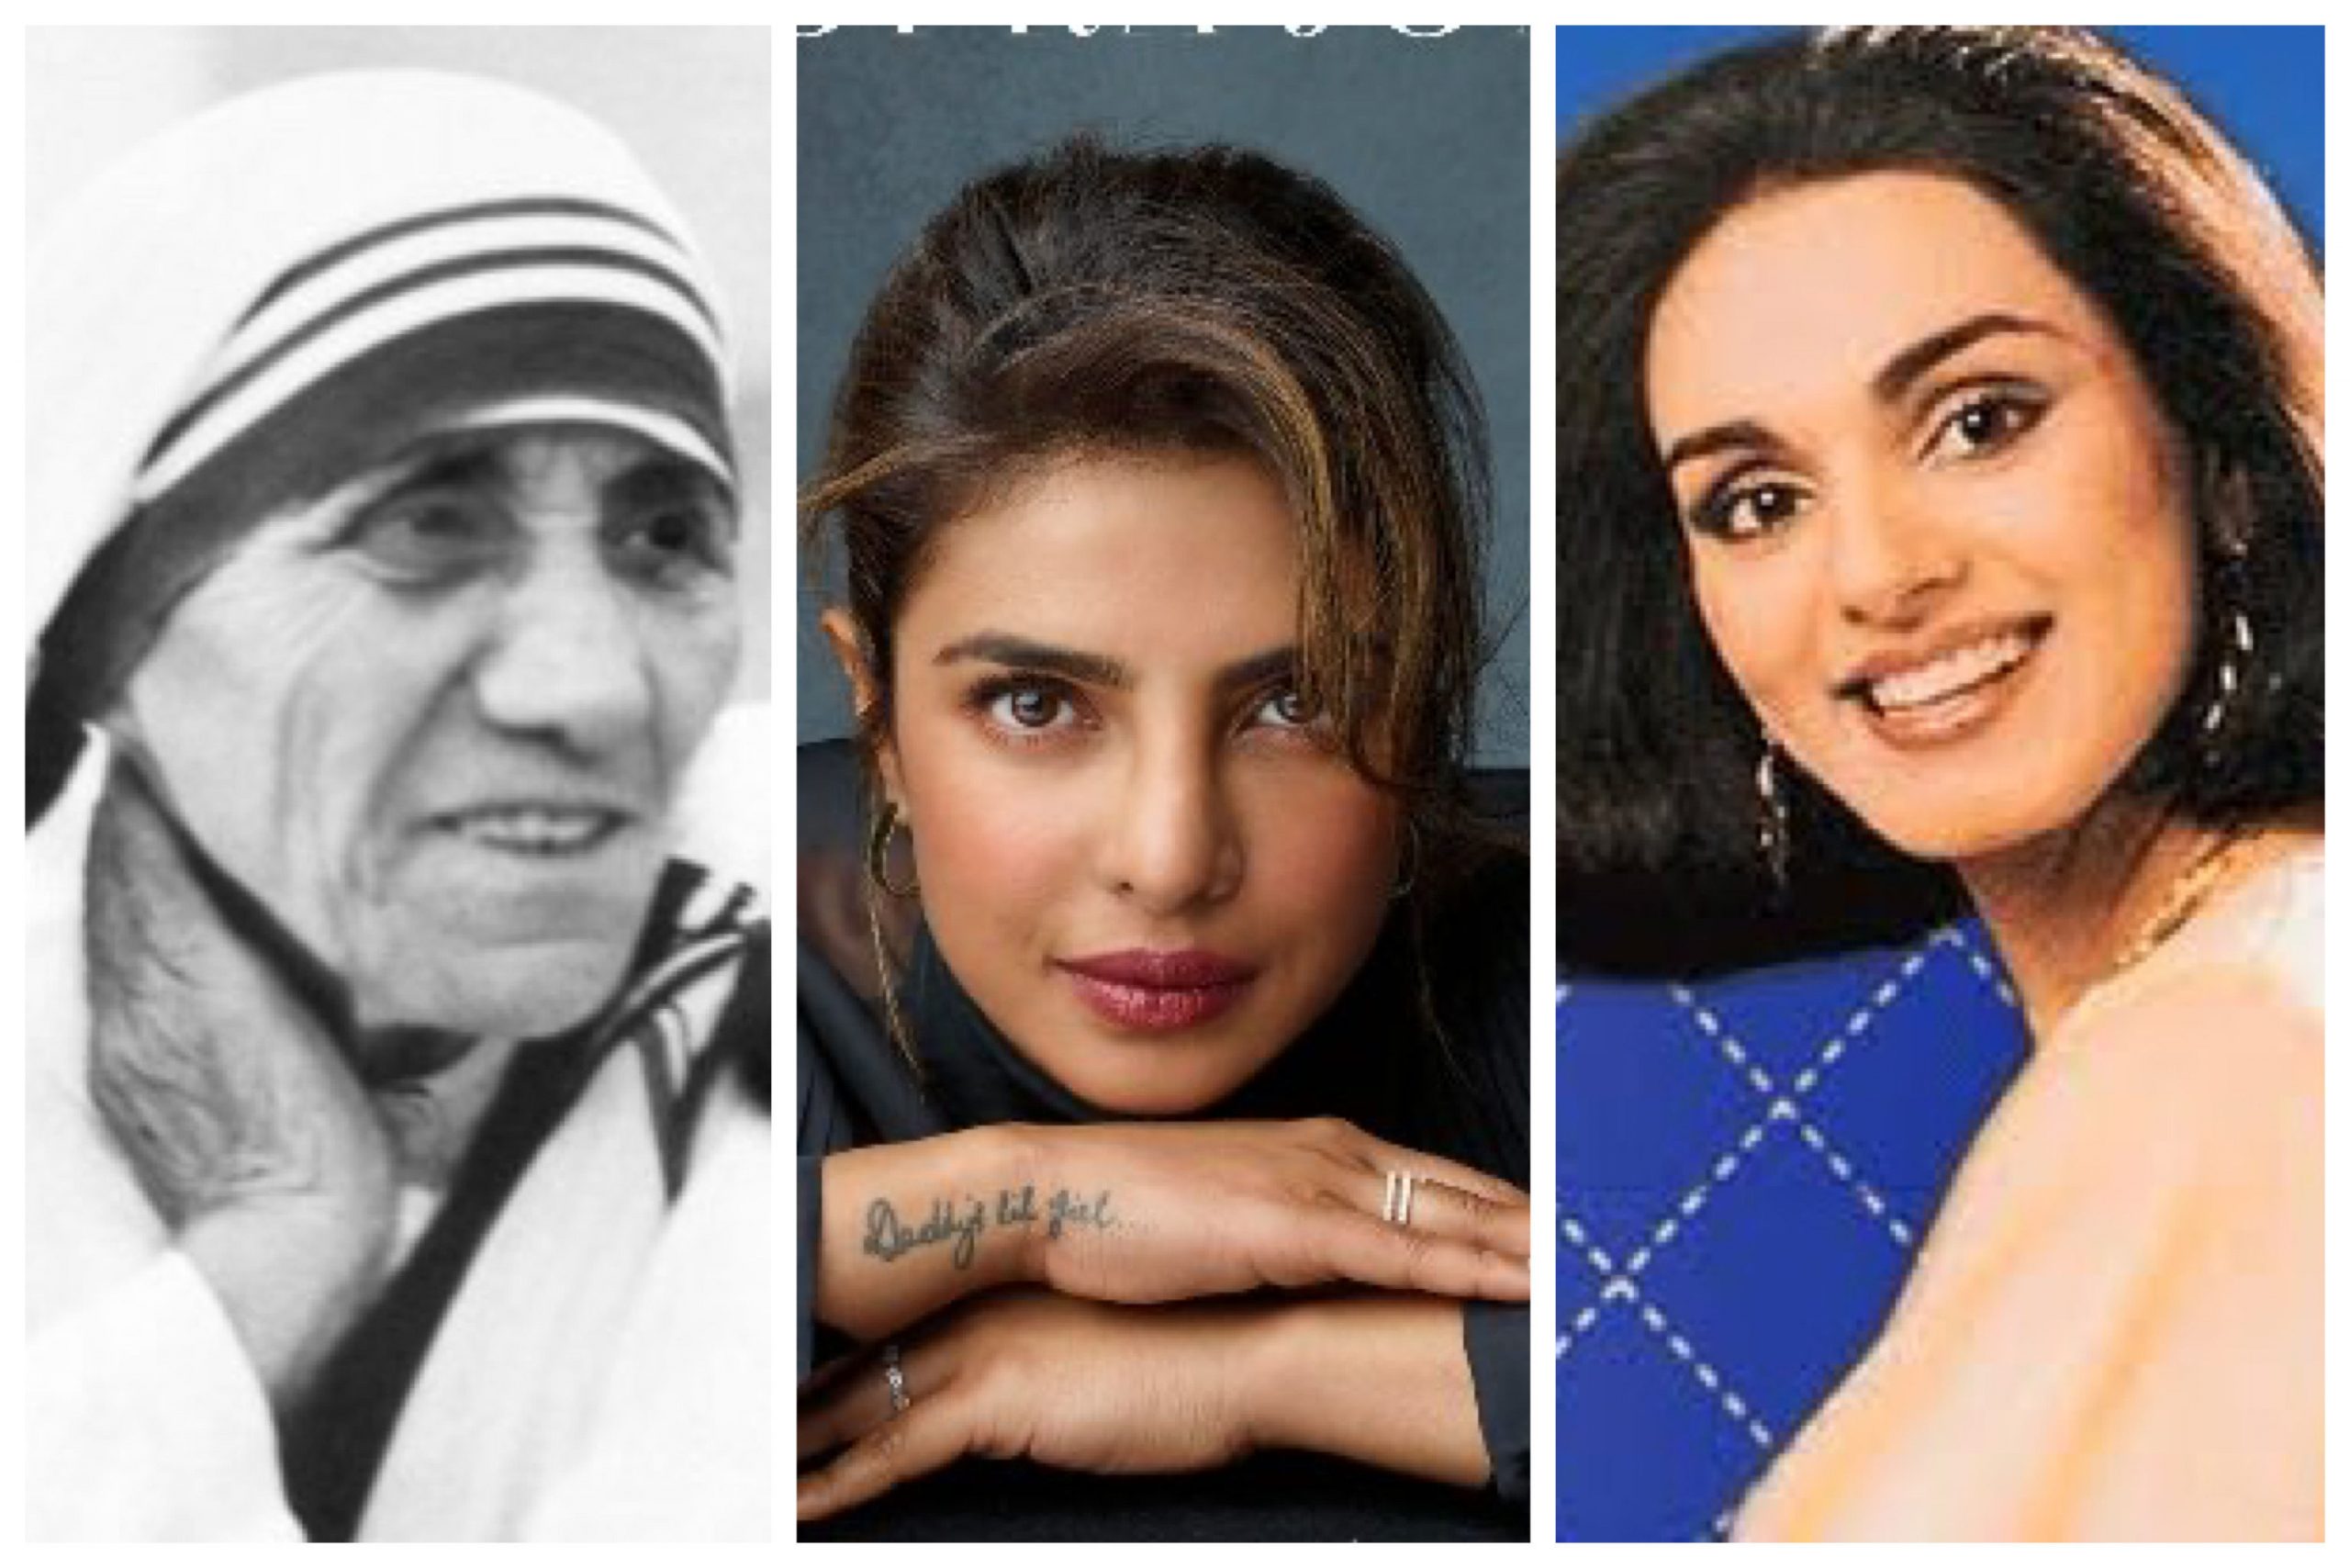 International Women’s Day 2021: 5 women who inspired a generation and beyond